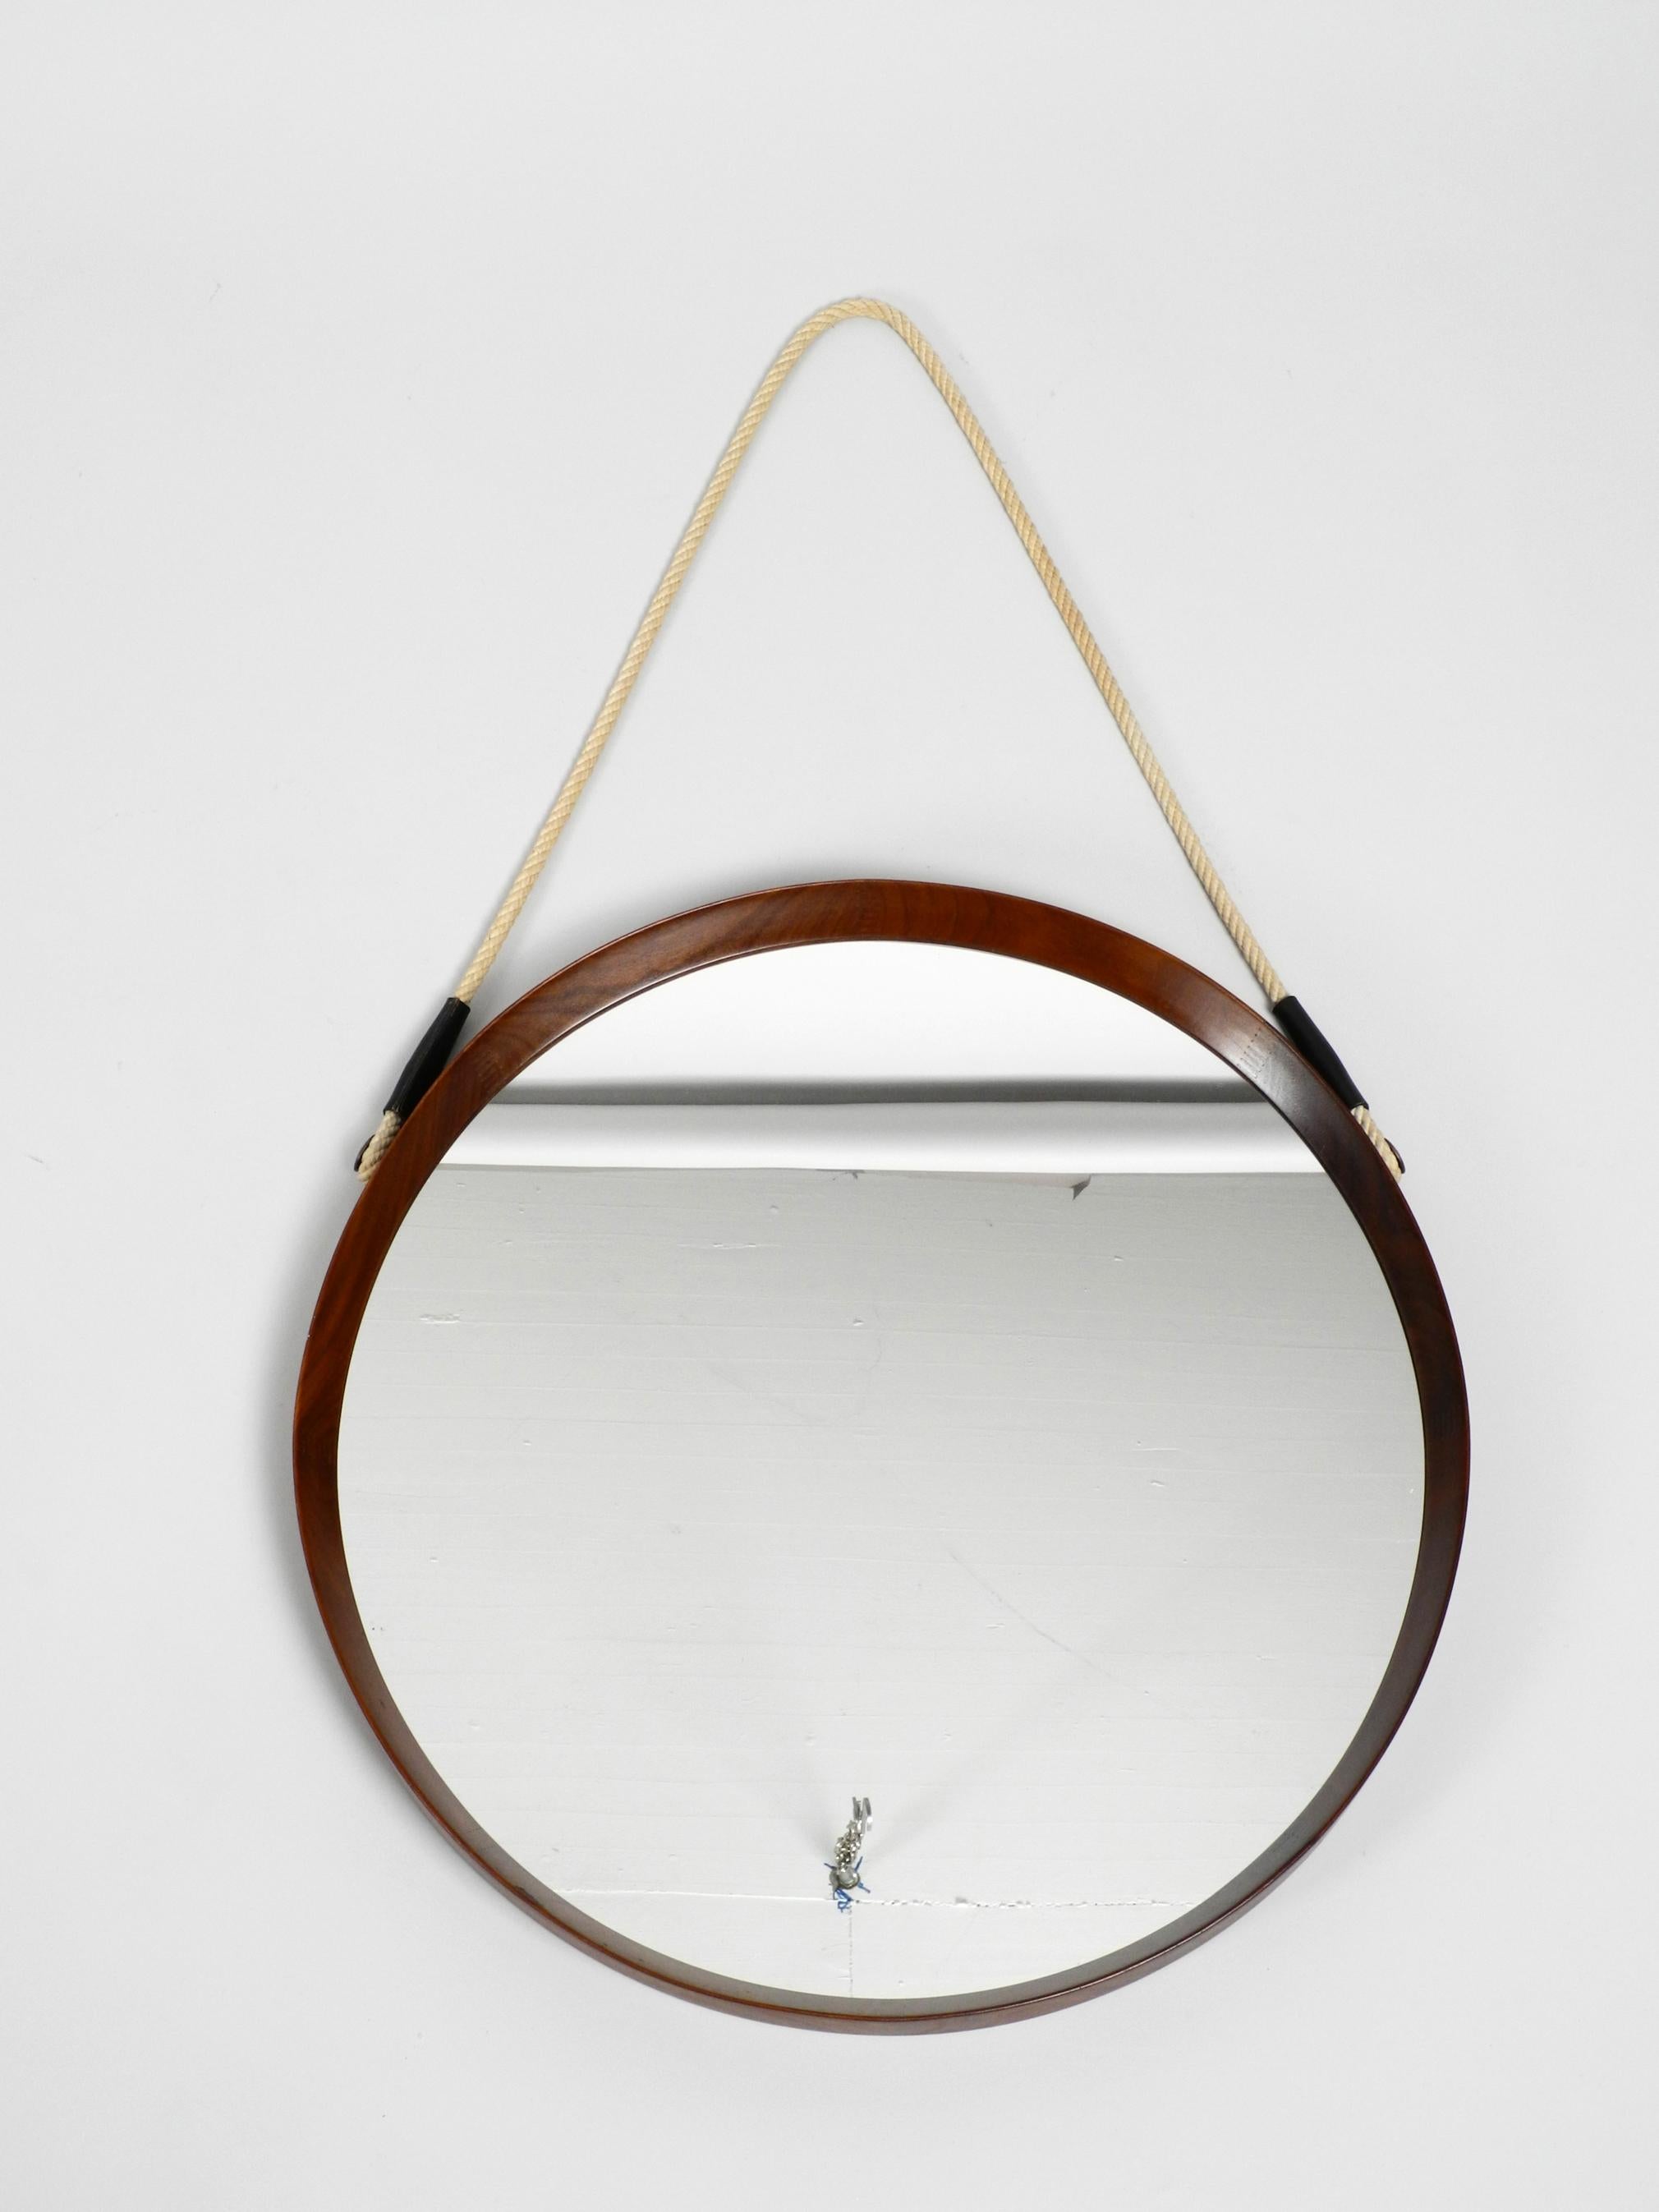 1960s Large Teak Wall Mirror with Thick Rope Made of Natural Fiber Made in Italy 8